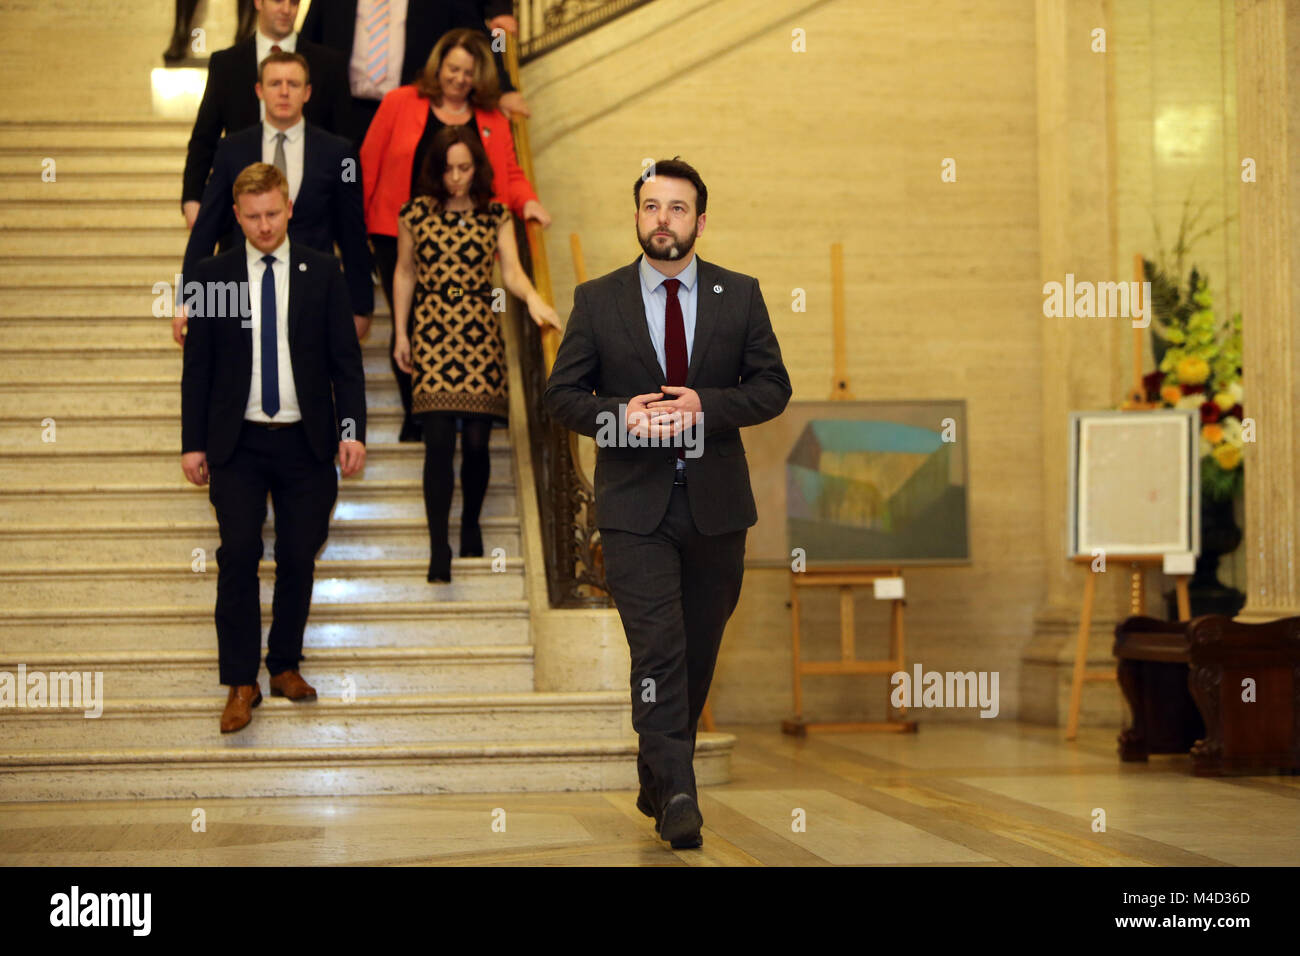 Social Democratic and Labour Party (SDLP) leader Colum Eastwood speaks to the media at Stormont,  Belfast, Monday, Feb 12th, 2018. Britain's Prime Minister Theresa May and Irish Prime Minister Leo Varadkar are to visit Belfast later for talks with the Stormont parties. The Prime Ministers left without a deal to restore devolved government. Stock Photo